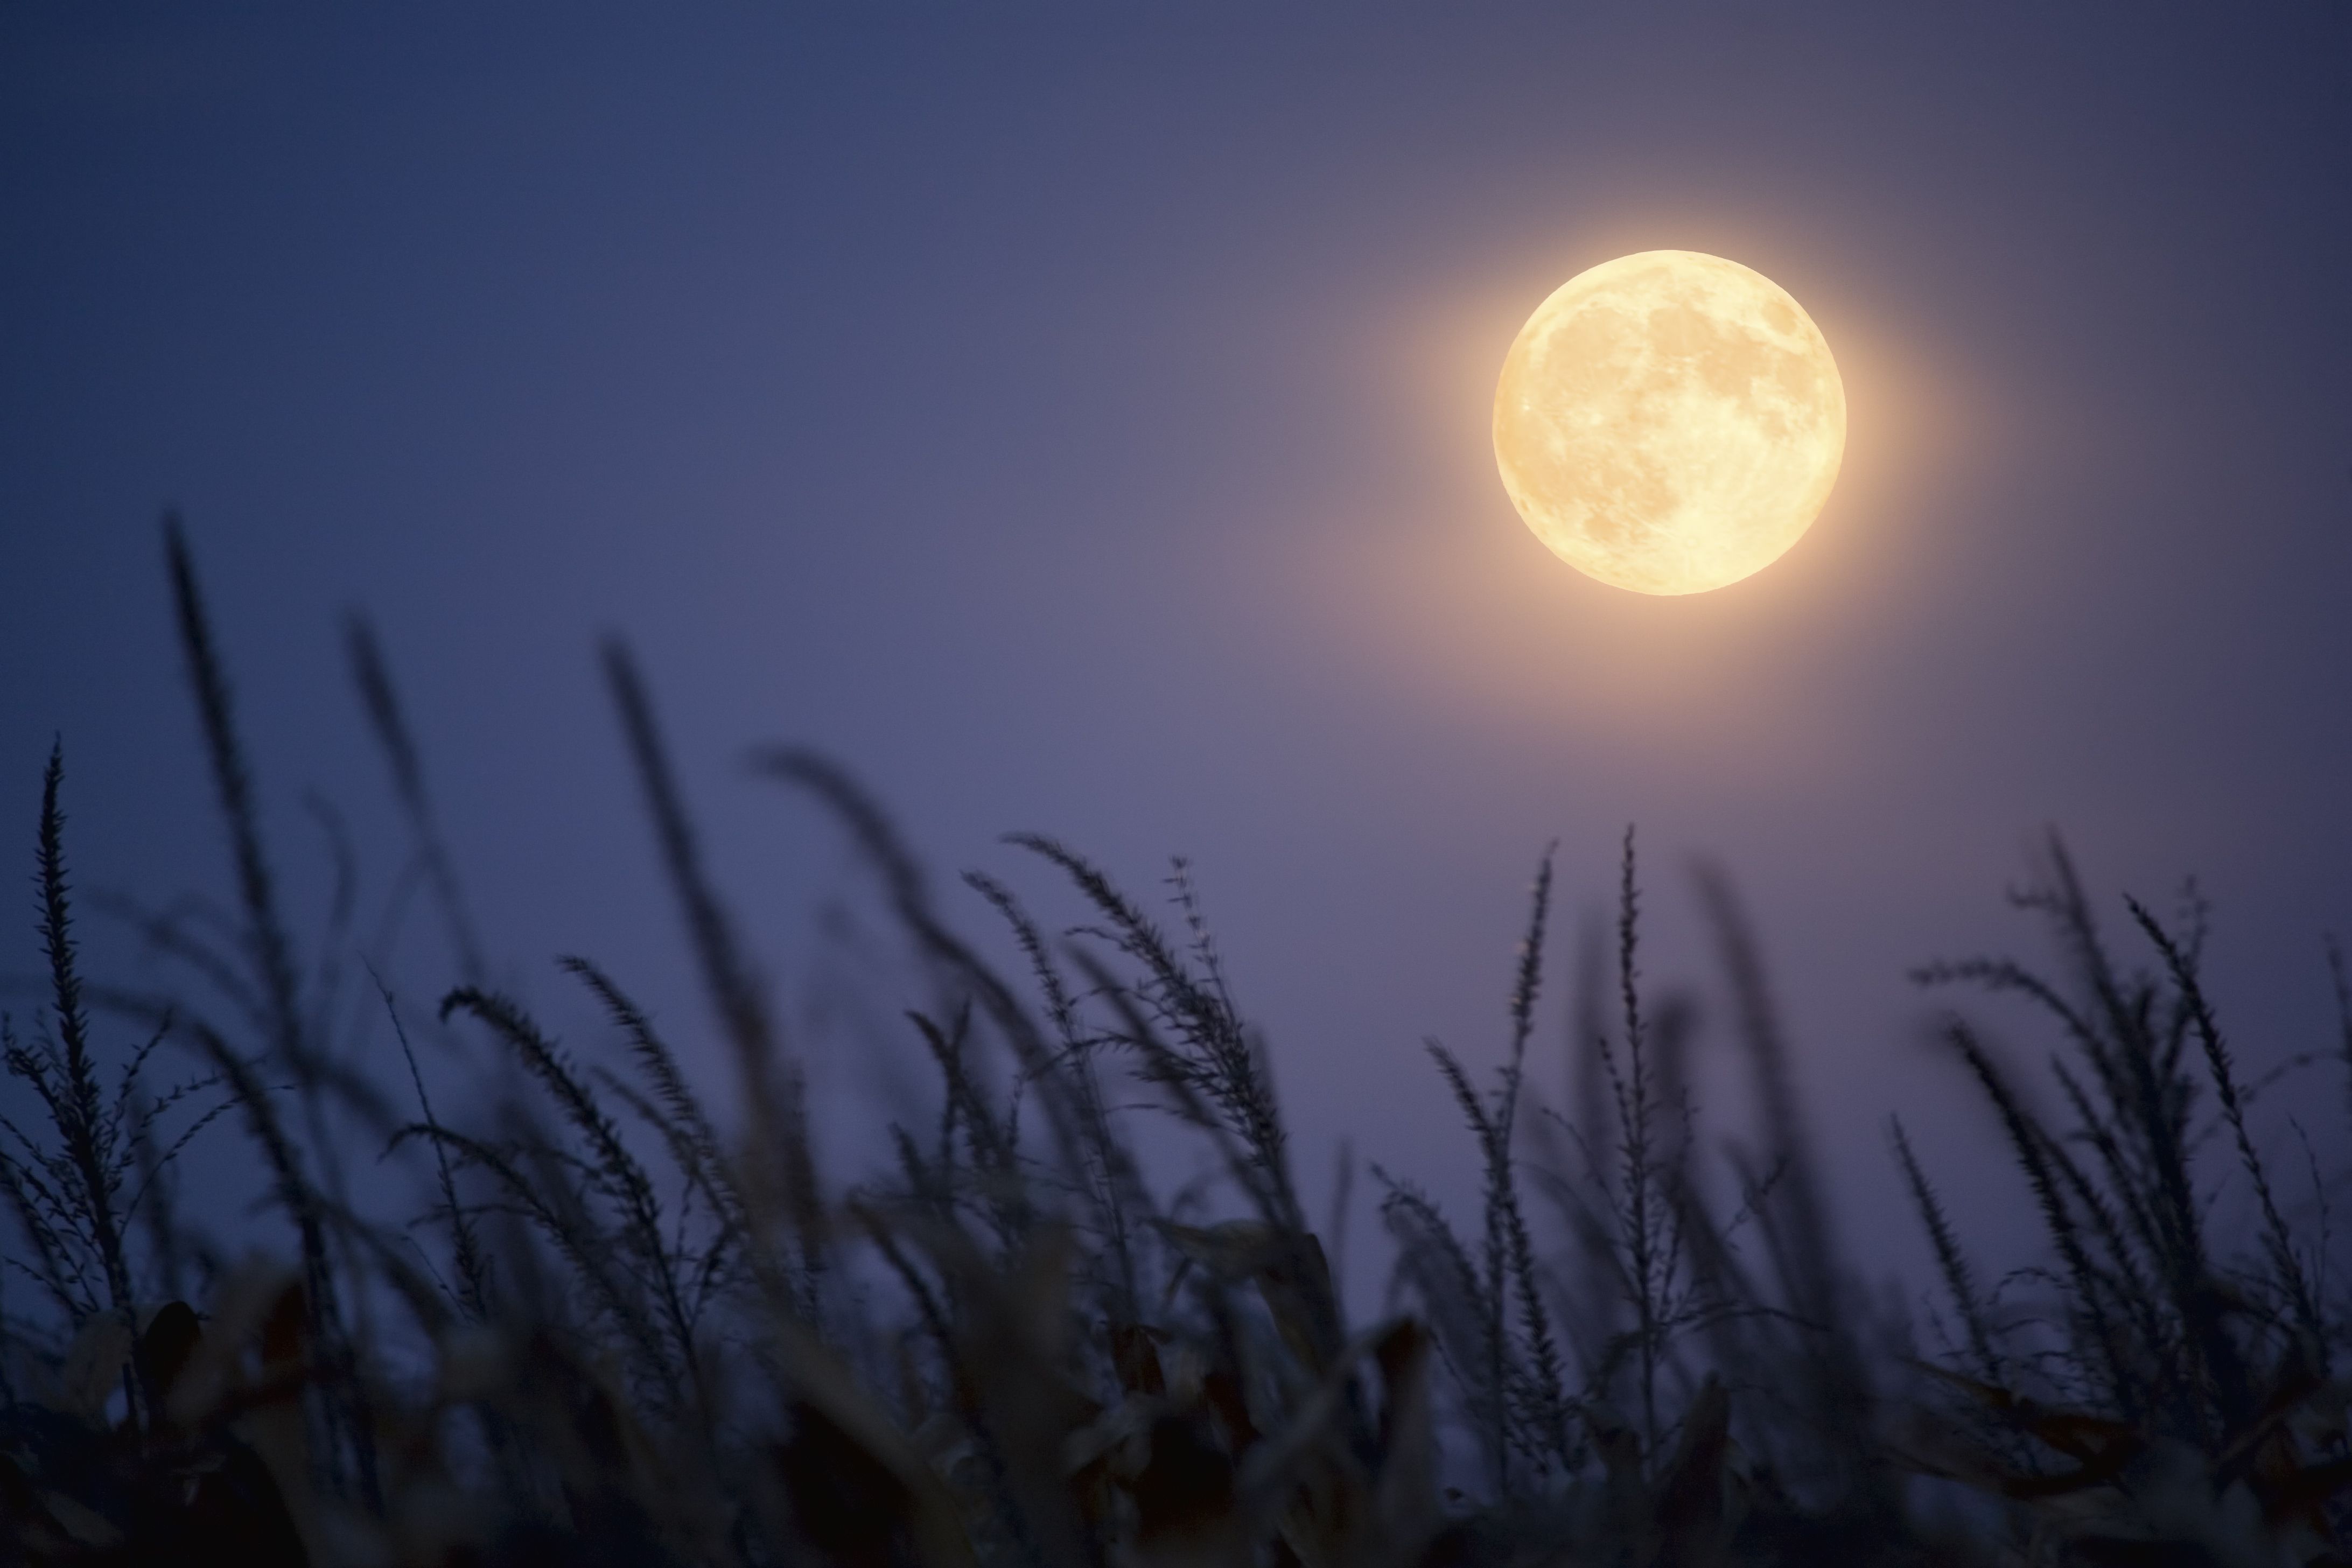 Why is September's full Moon called the Harvest Moon?